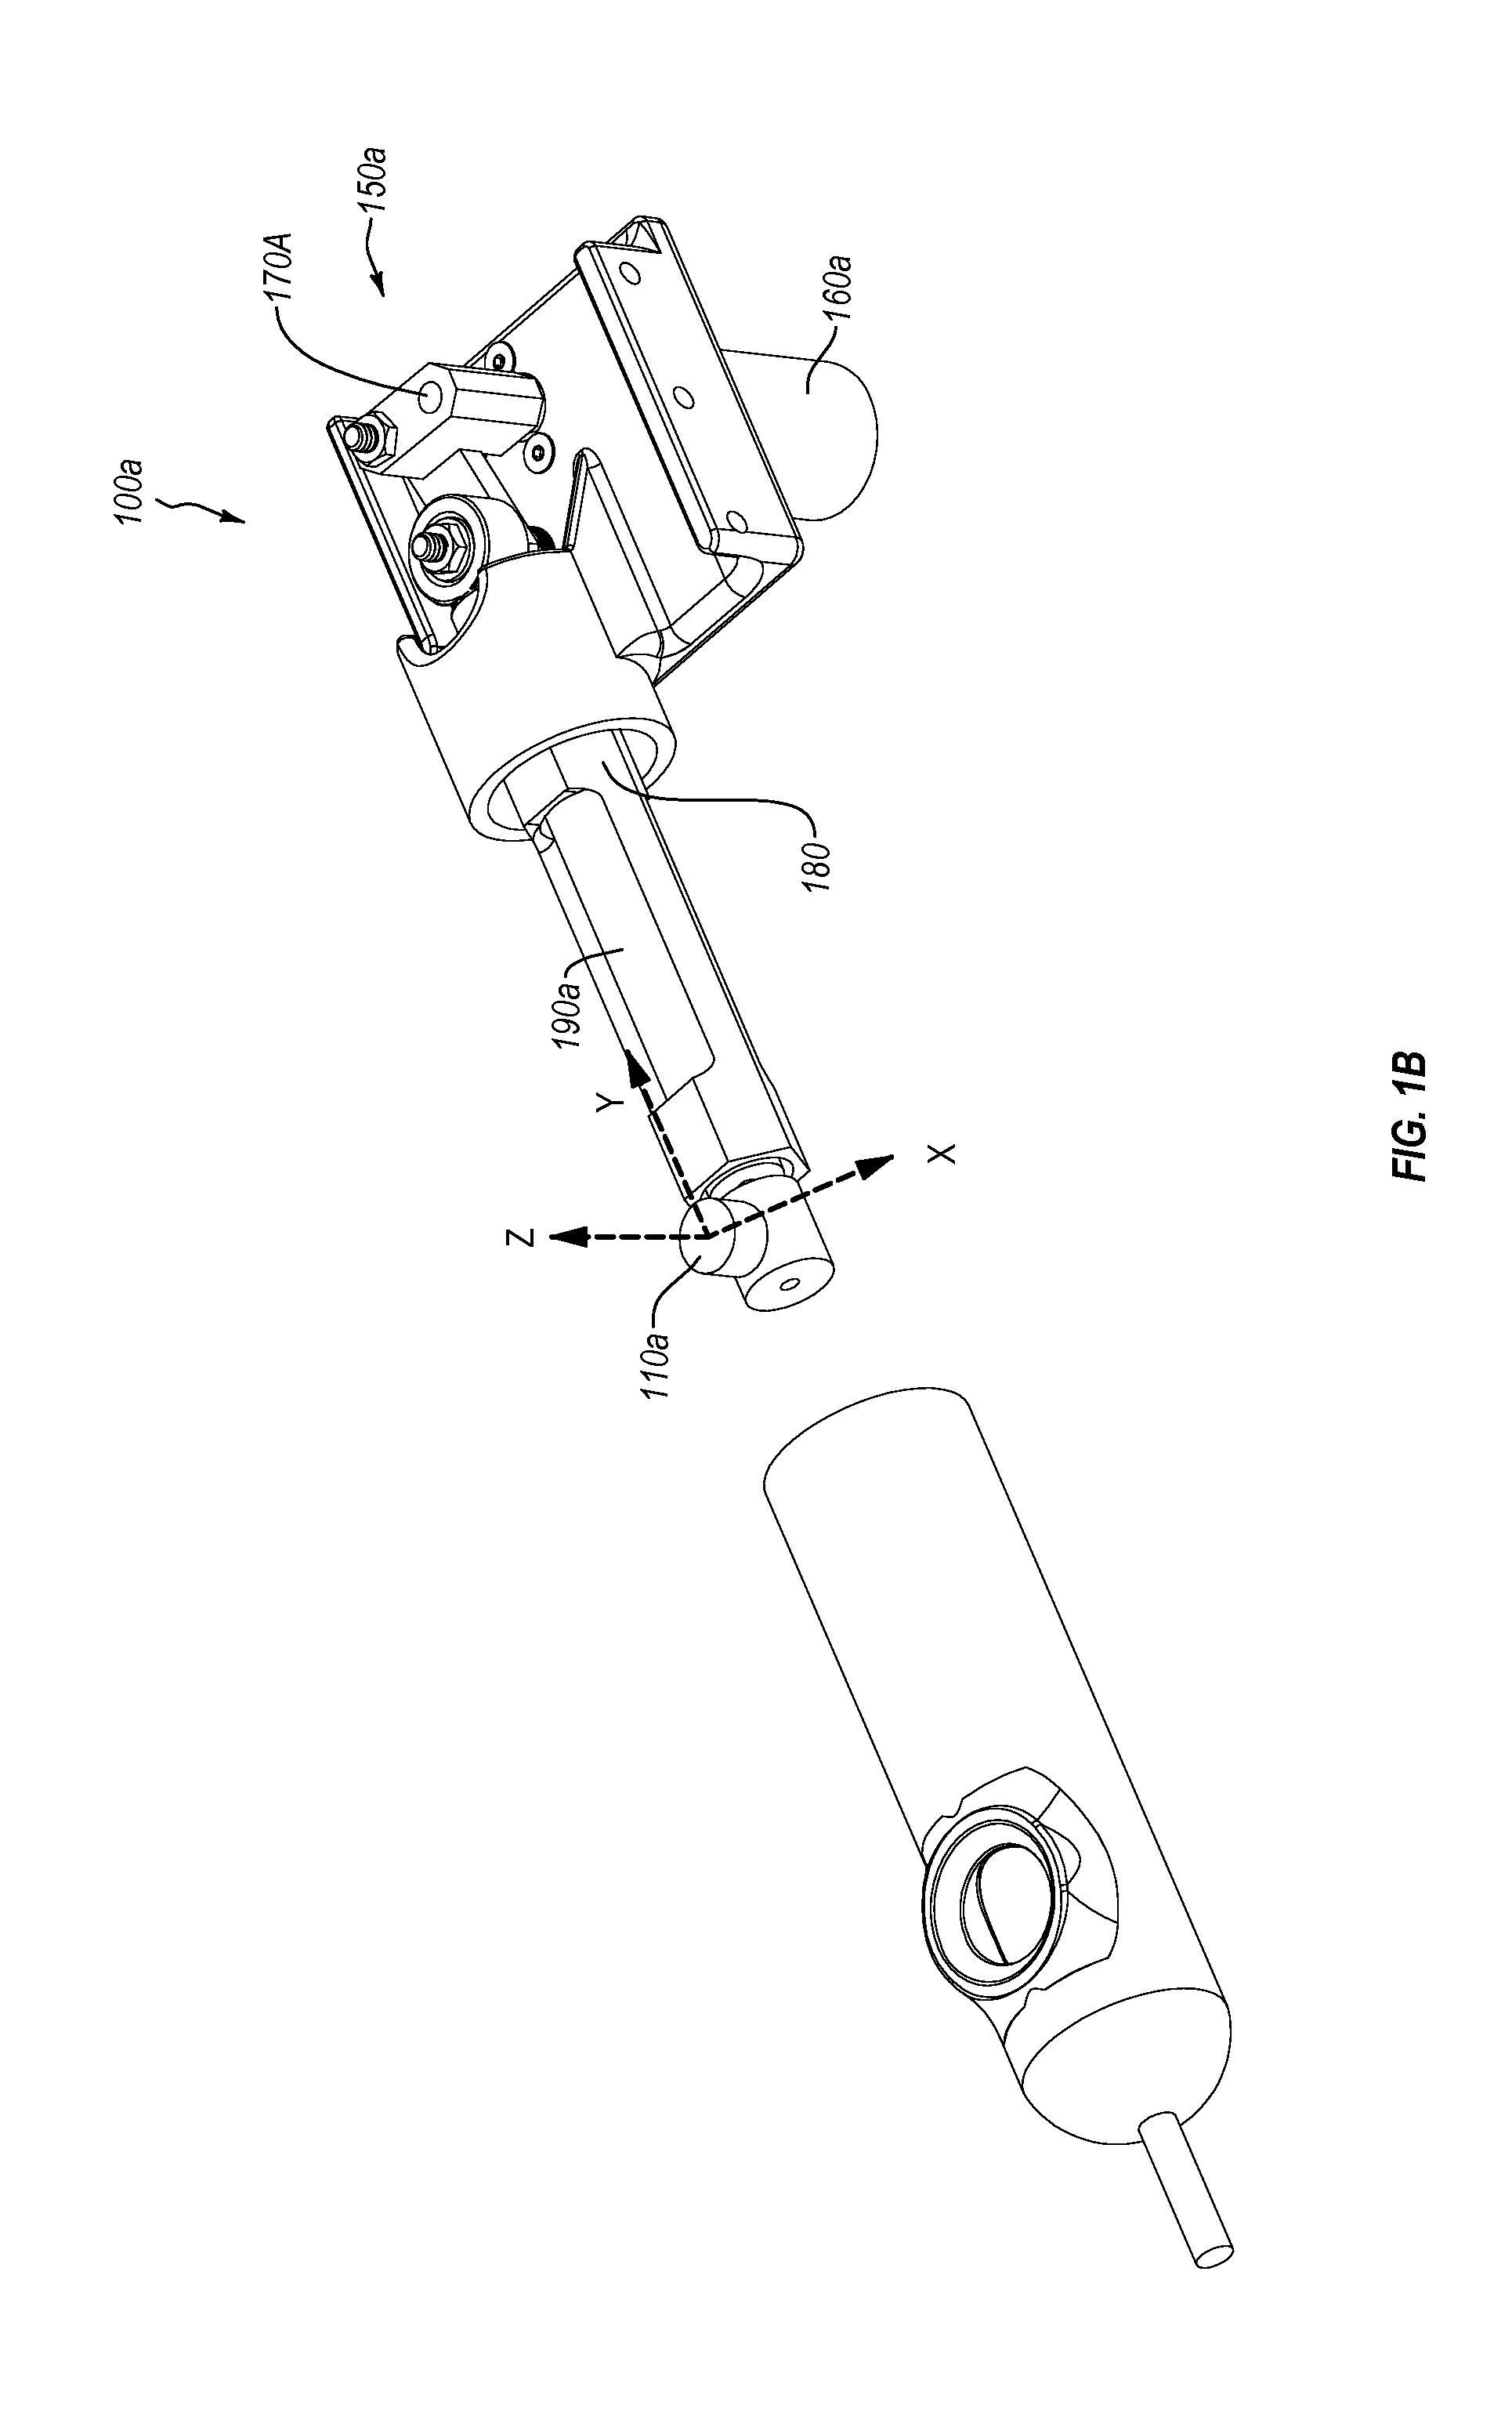 Skin stretch feedback devices, systems, and methods